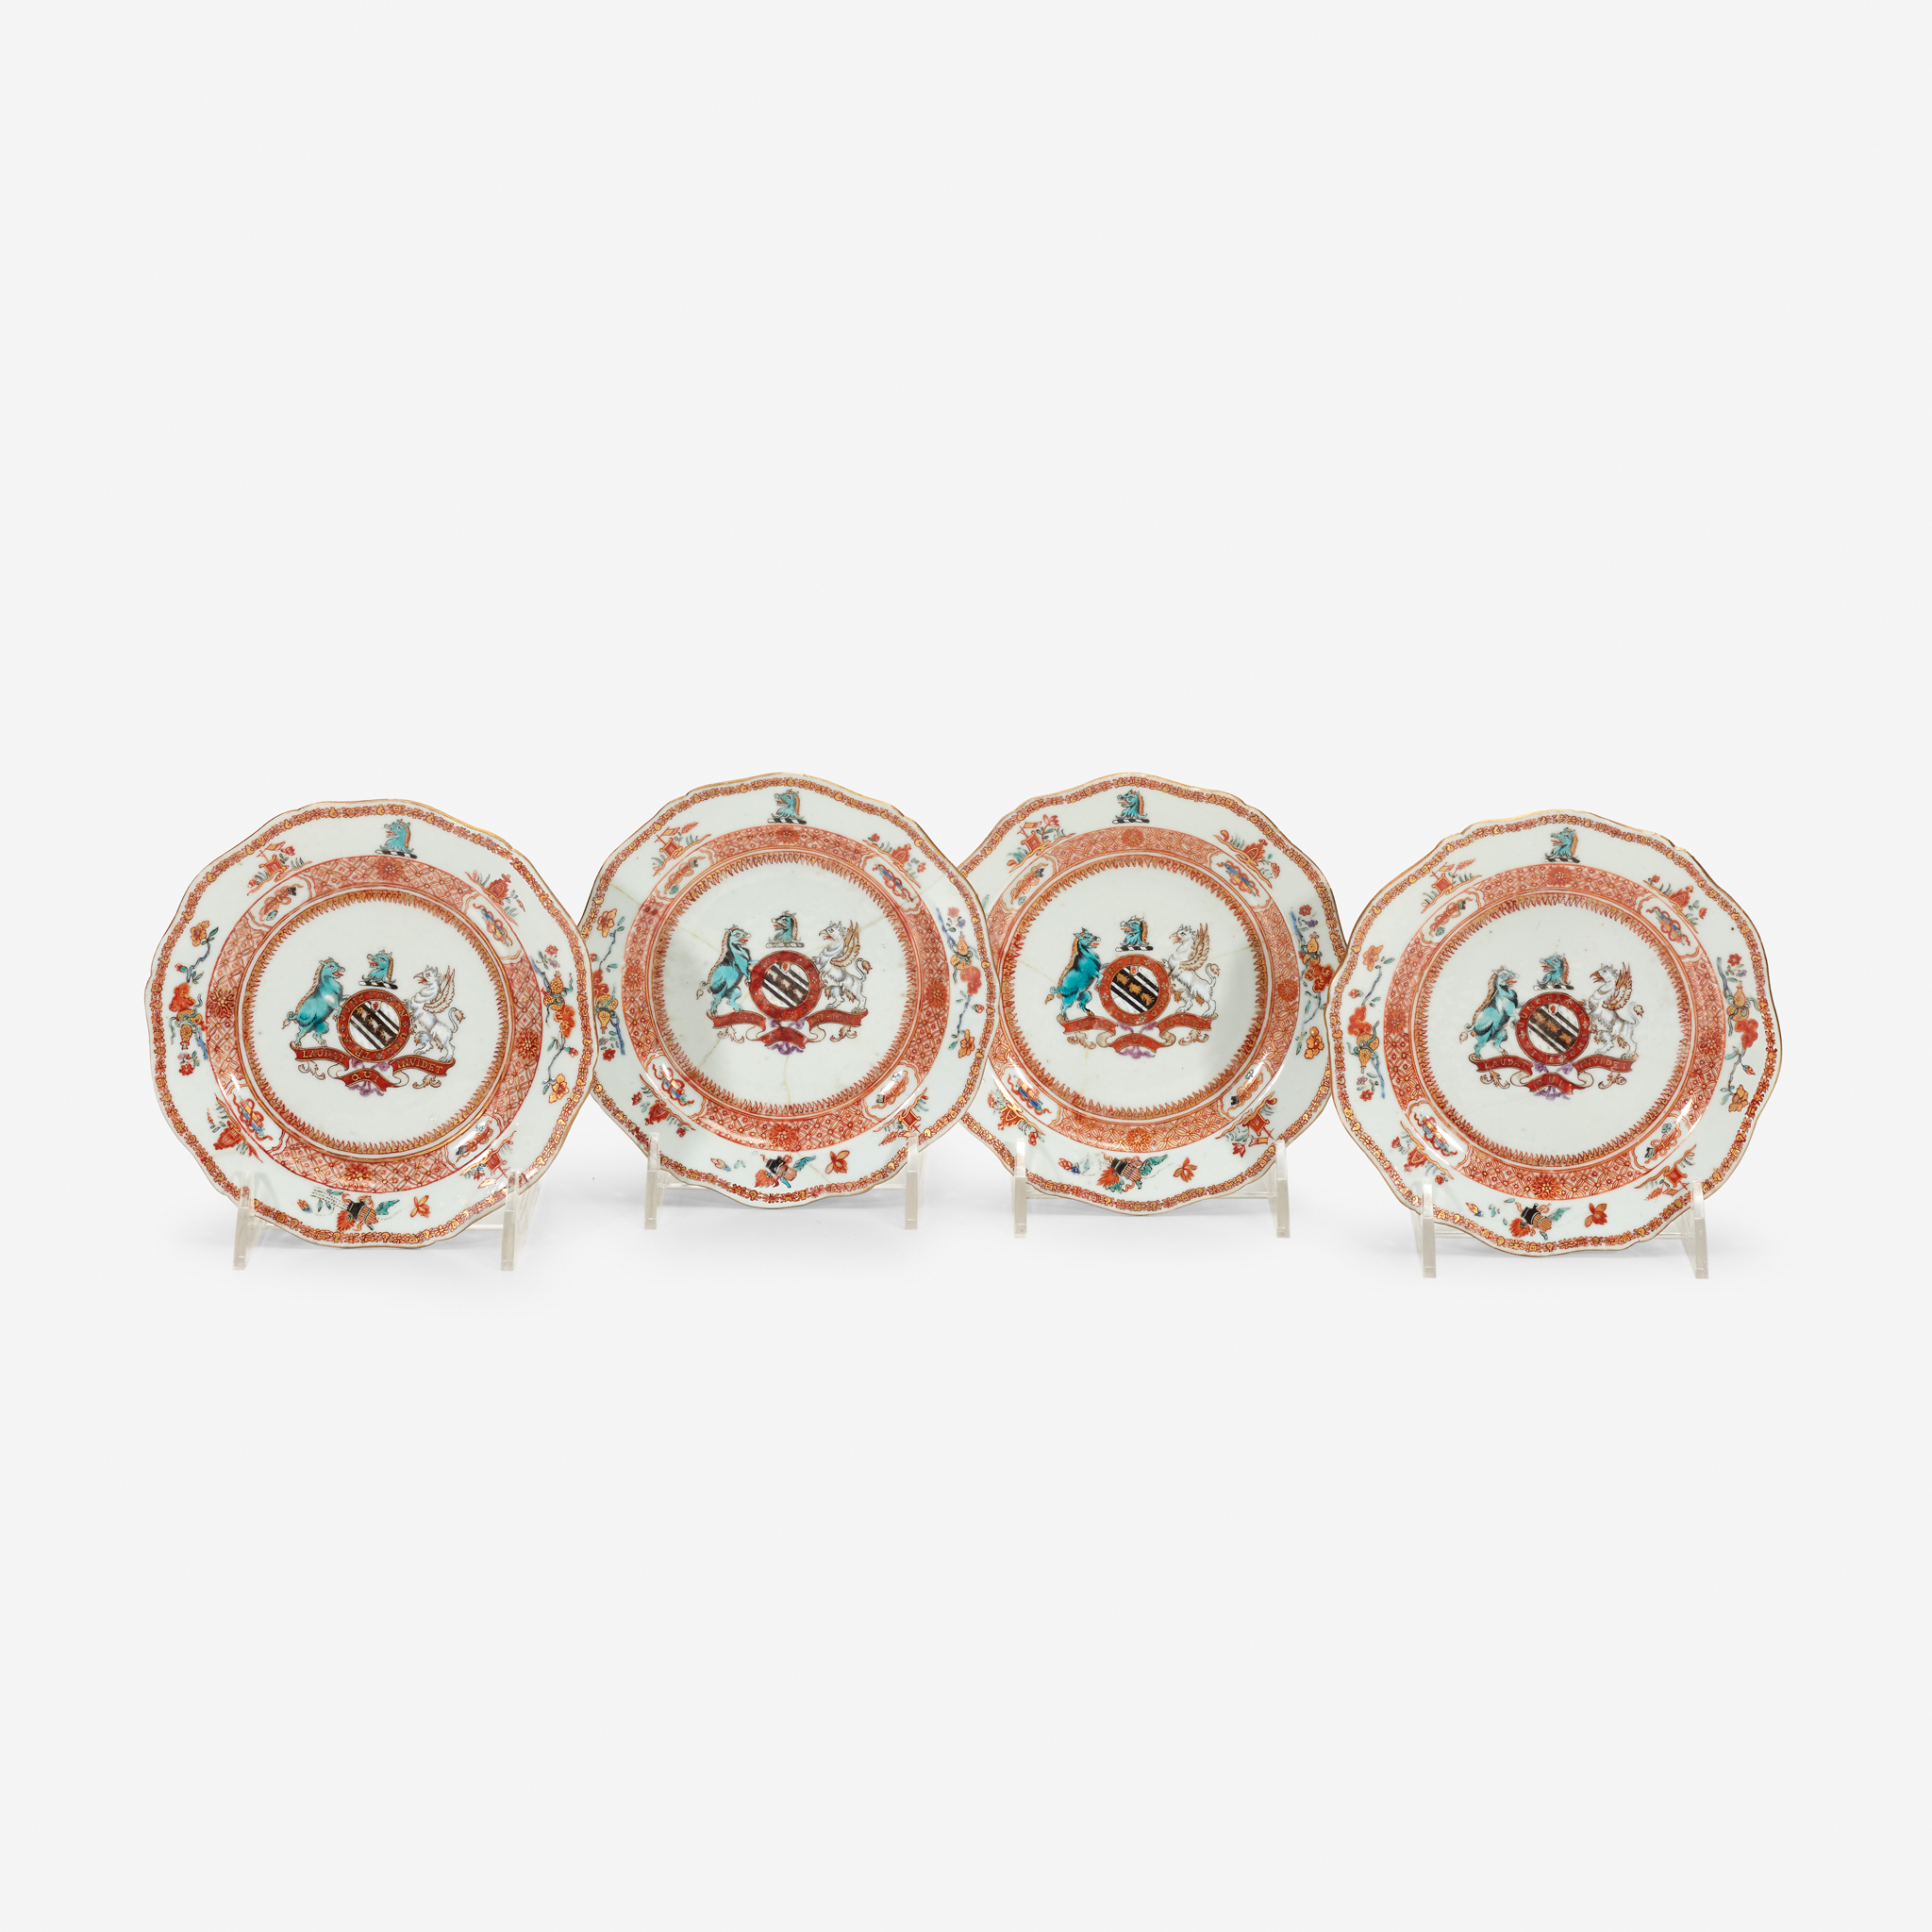 Four Chinese export porcelain armorial bread plates, late 18th/early 19th century